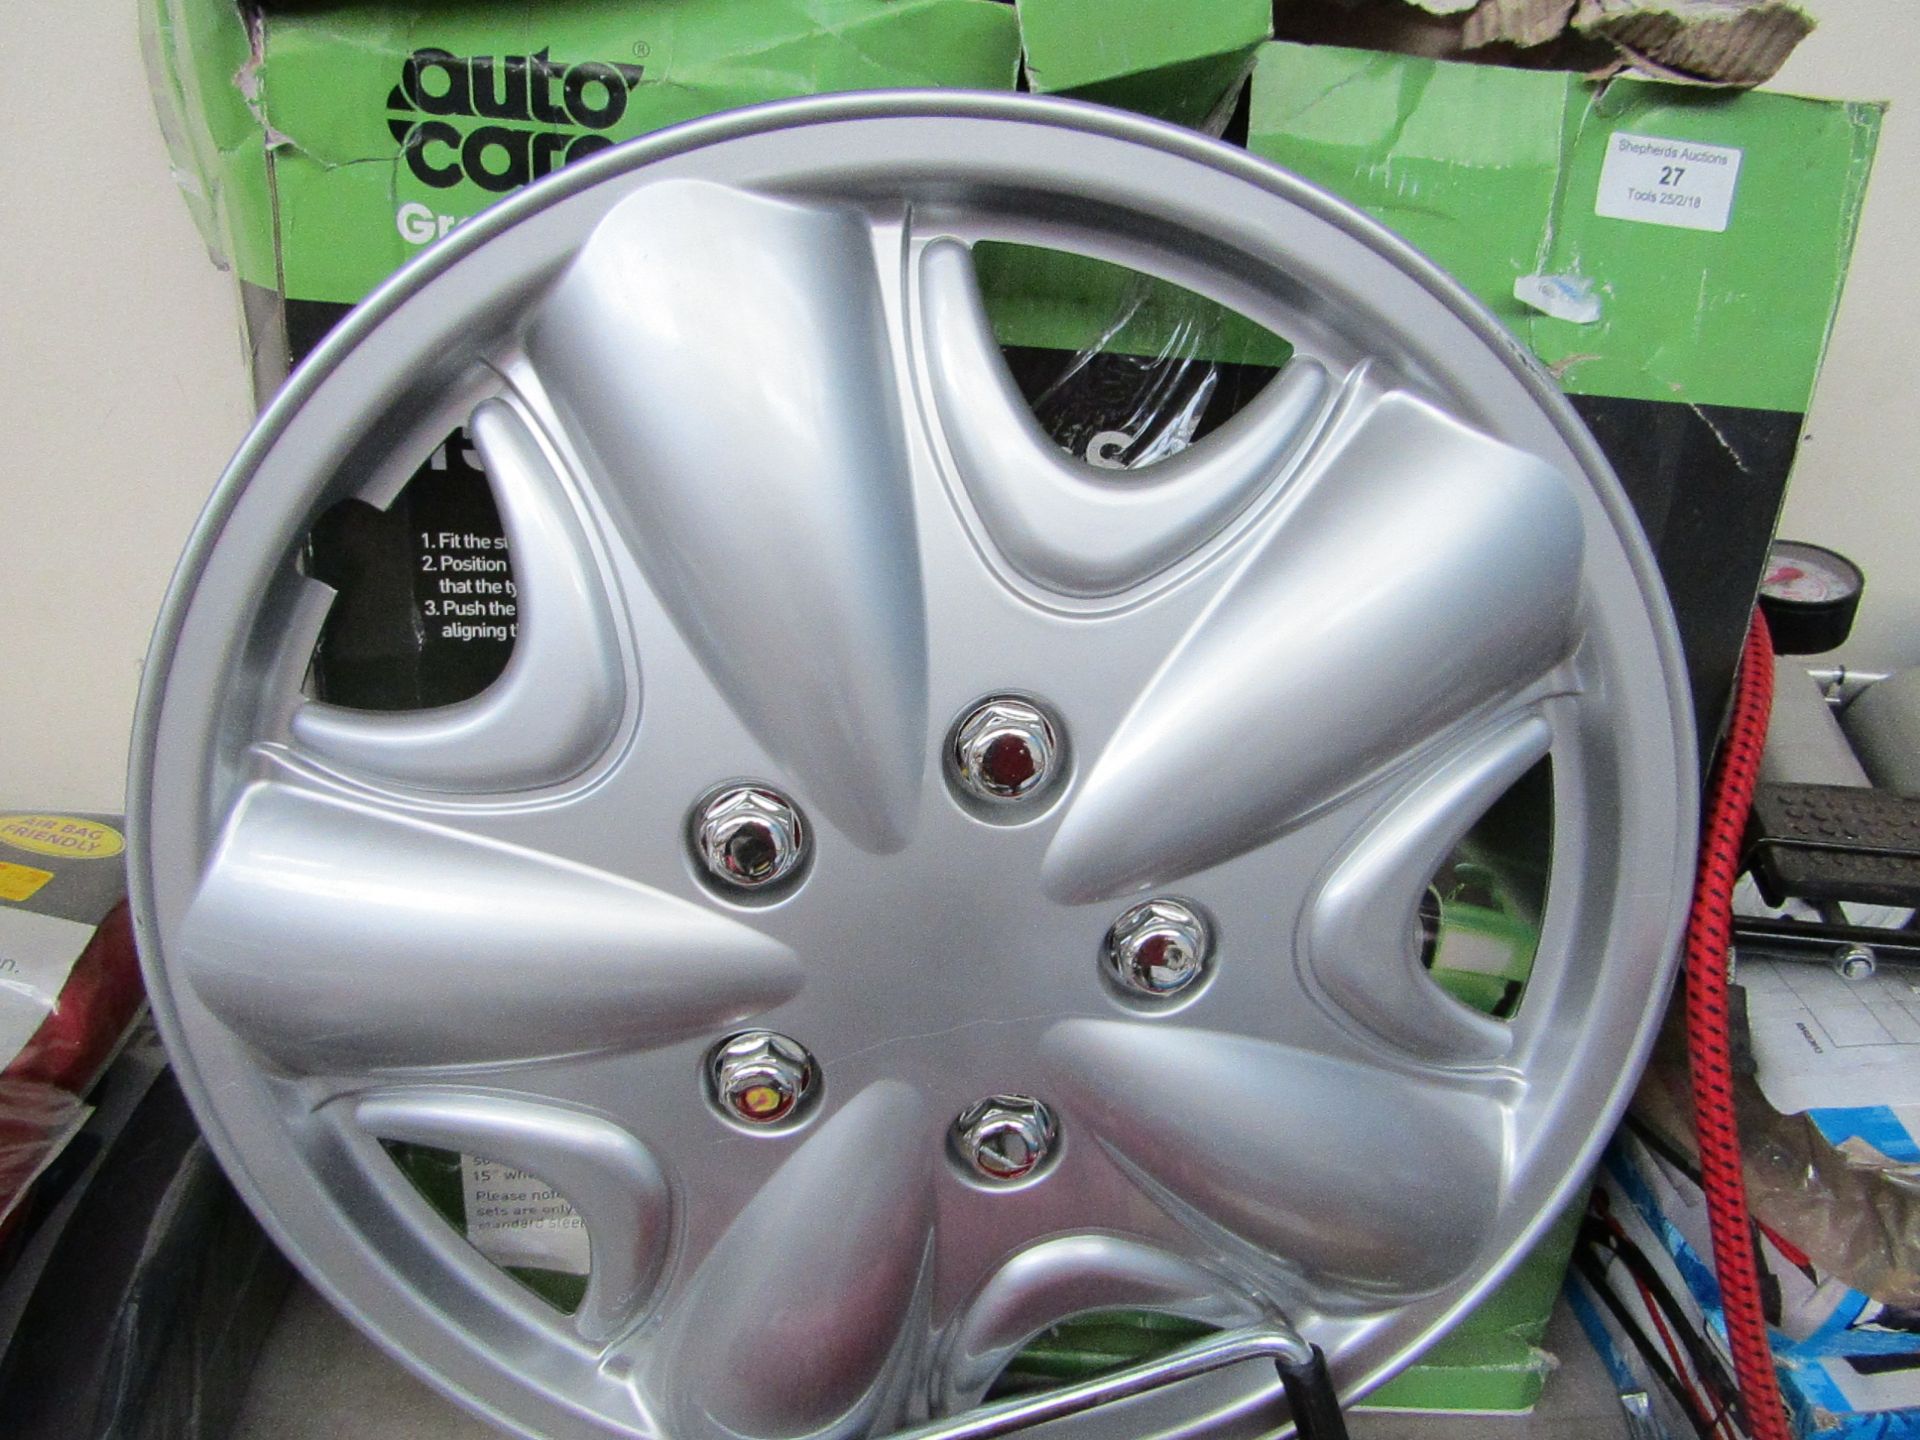 Auto Care 15" wheel cover set, unchecked and boxed.